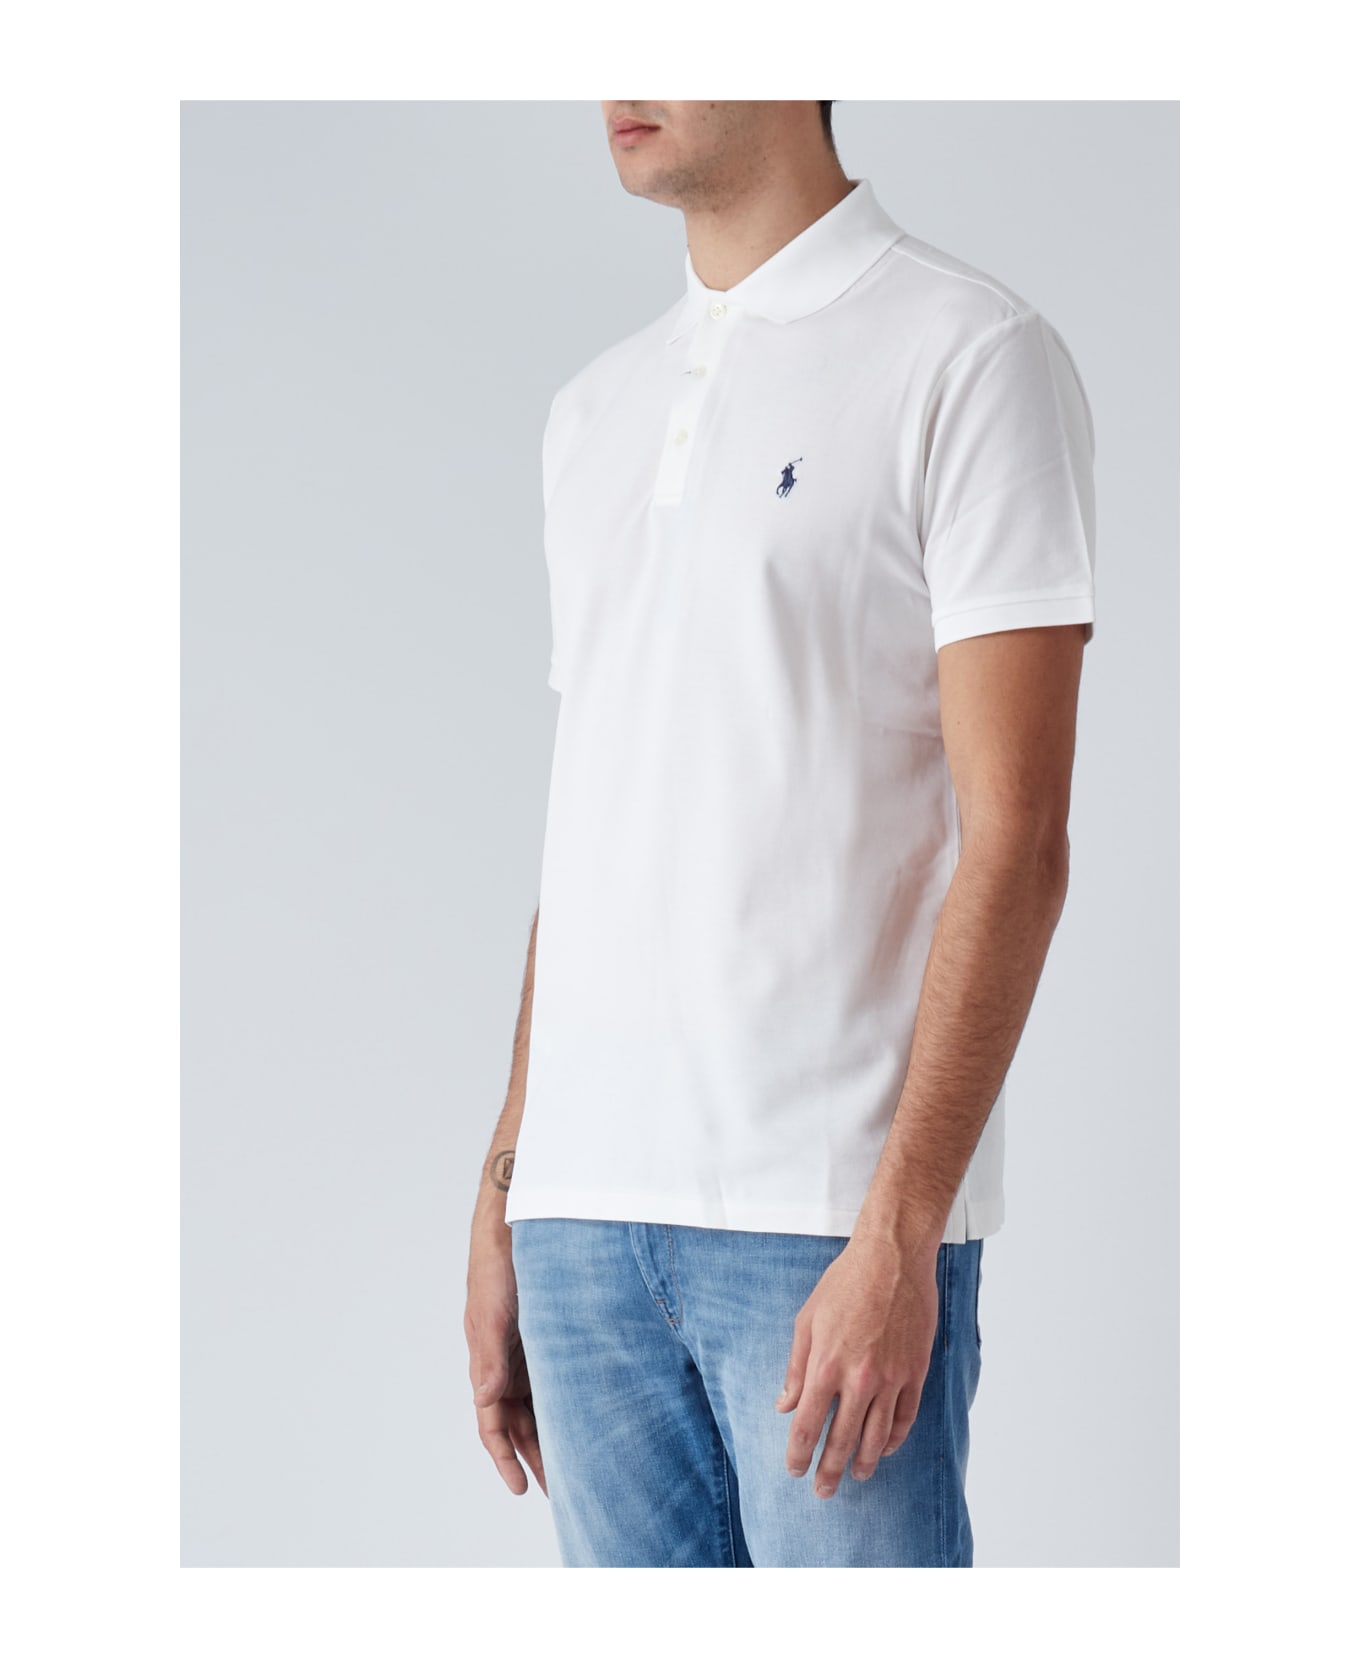 Polo Ralph Lauren White Slim Fit Polo Shirt With Contrasting Pony - 008 ポロシャツ